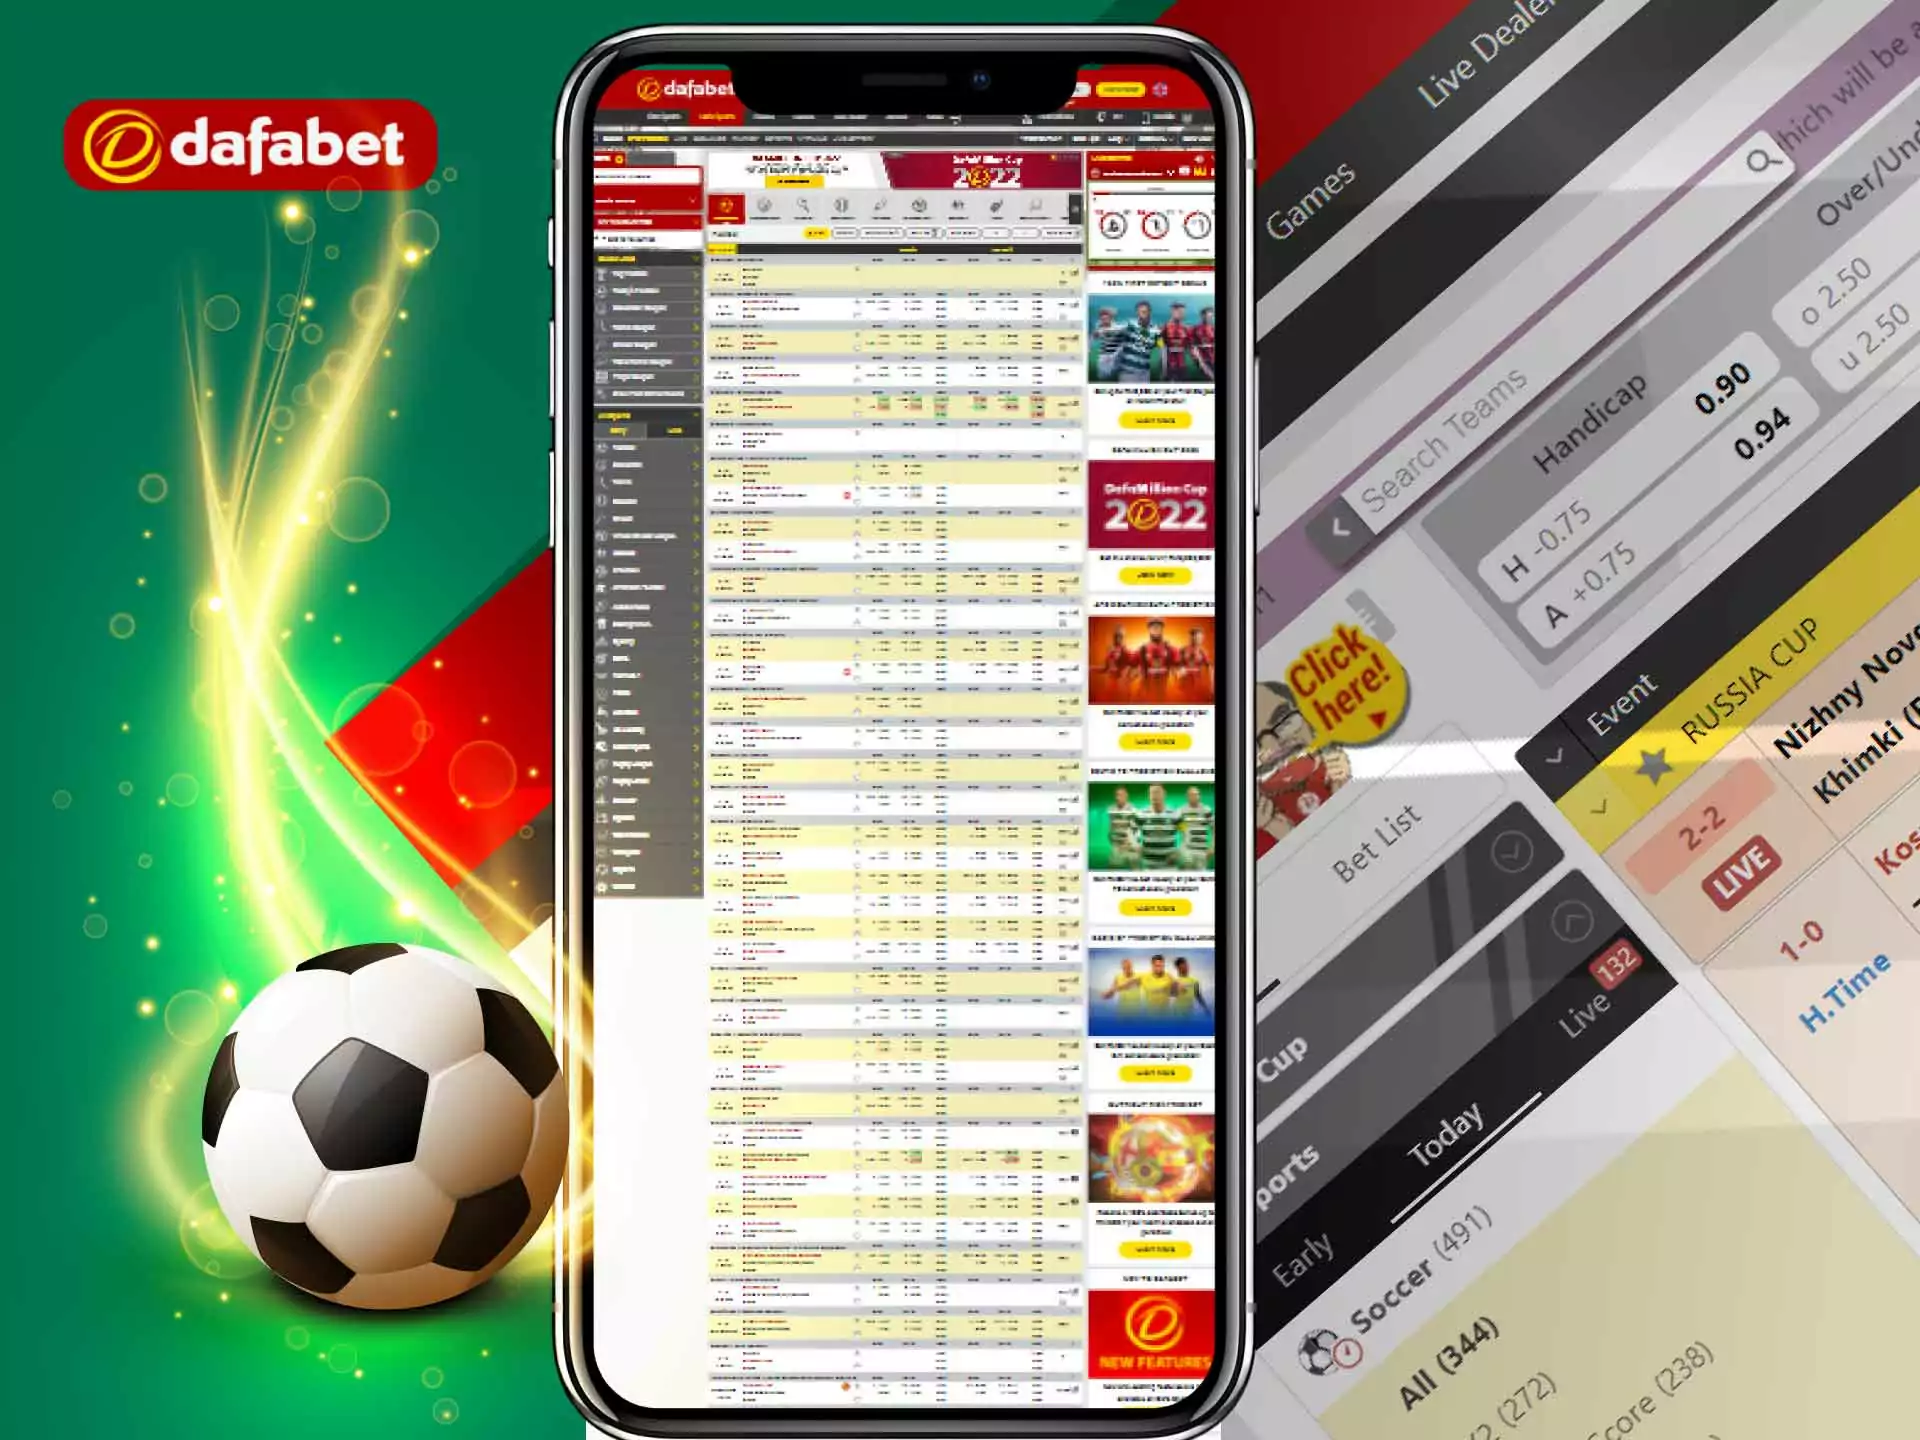 Place a bet on the winner of the match at Dafabet.